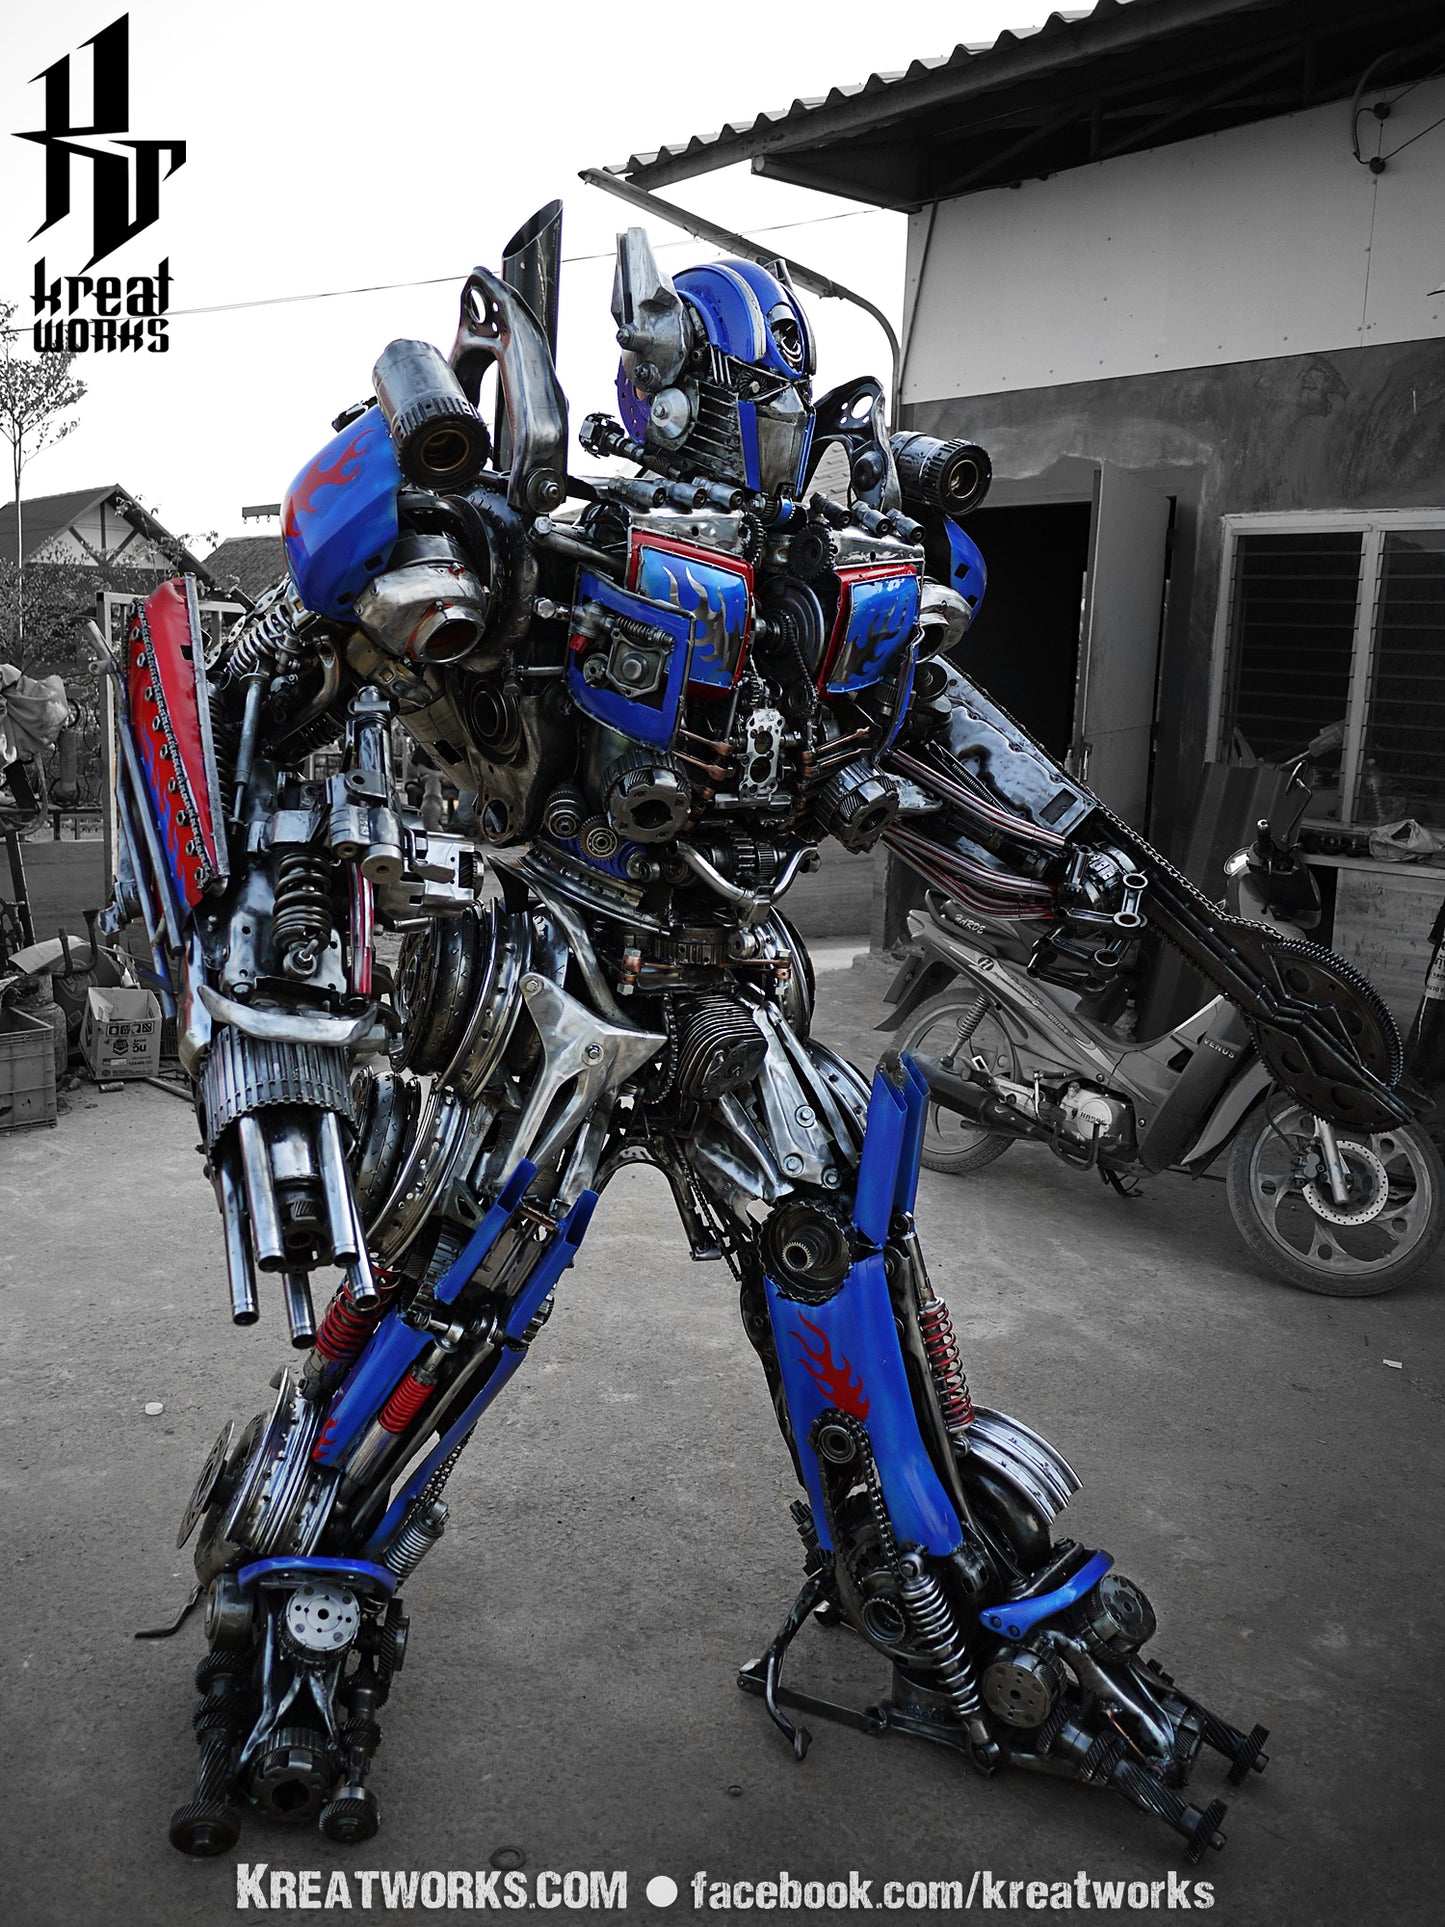 Dieselpunk Recycled Metal Brave Giant Robot (made-to-order) / Recycle Metal Sustainable Sculpture Art